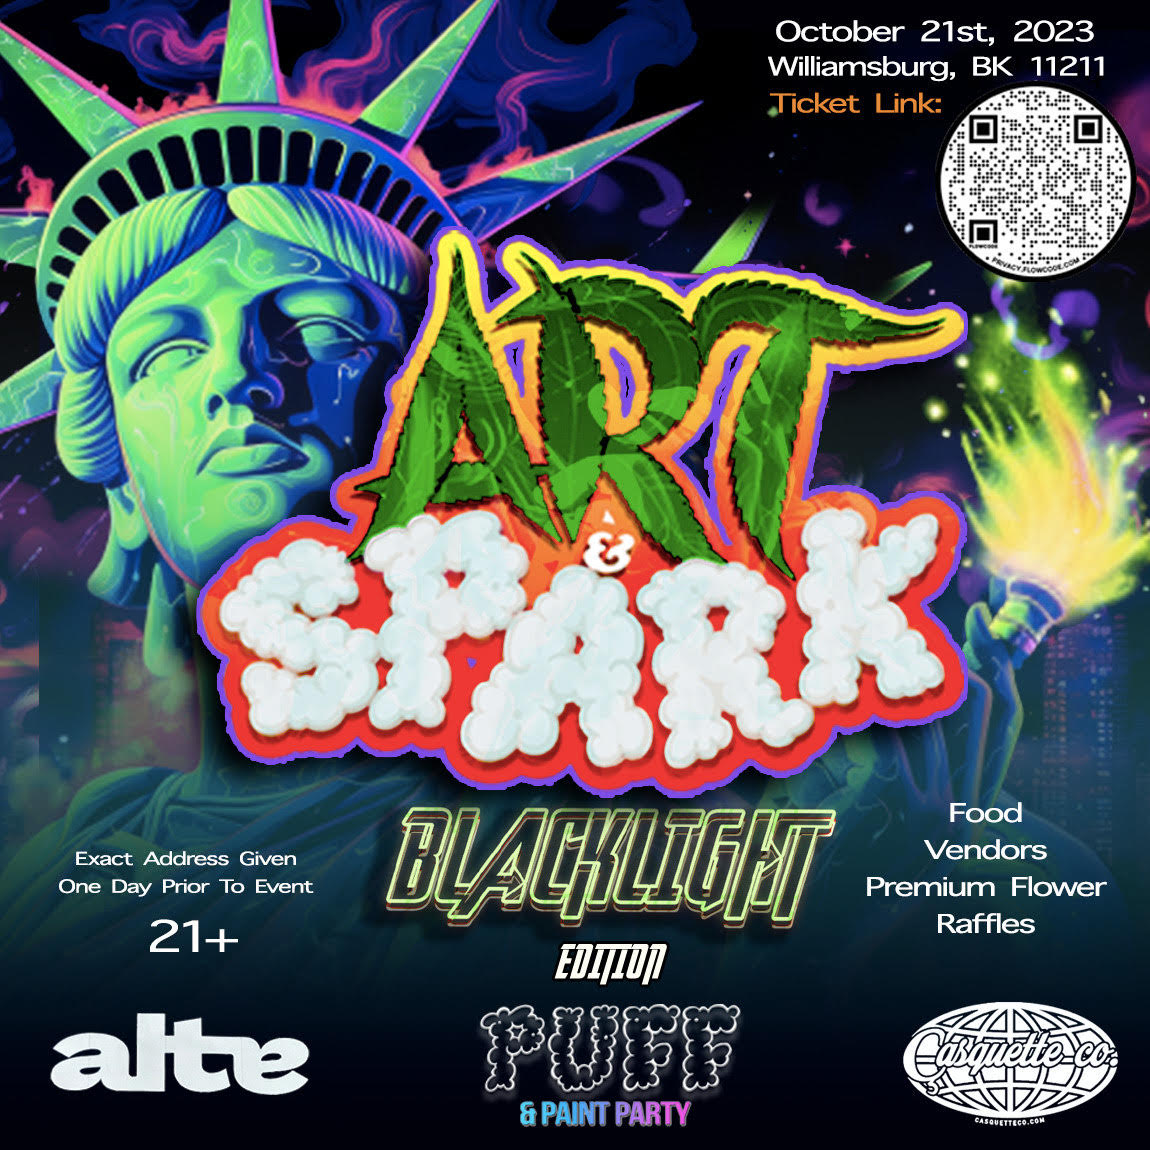 Puff & Paint Party Brooklyn NYC (ART & SPARK BLACKLIGHT EDITION)